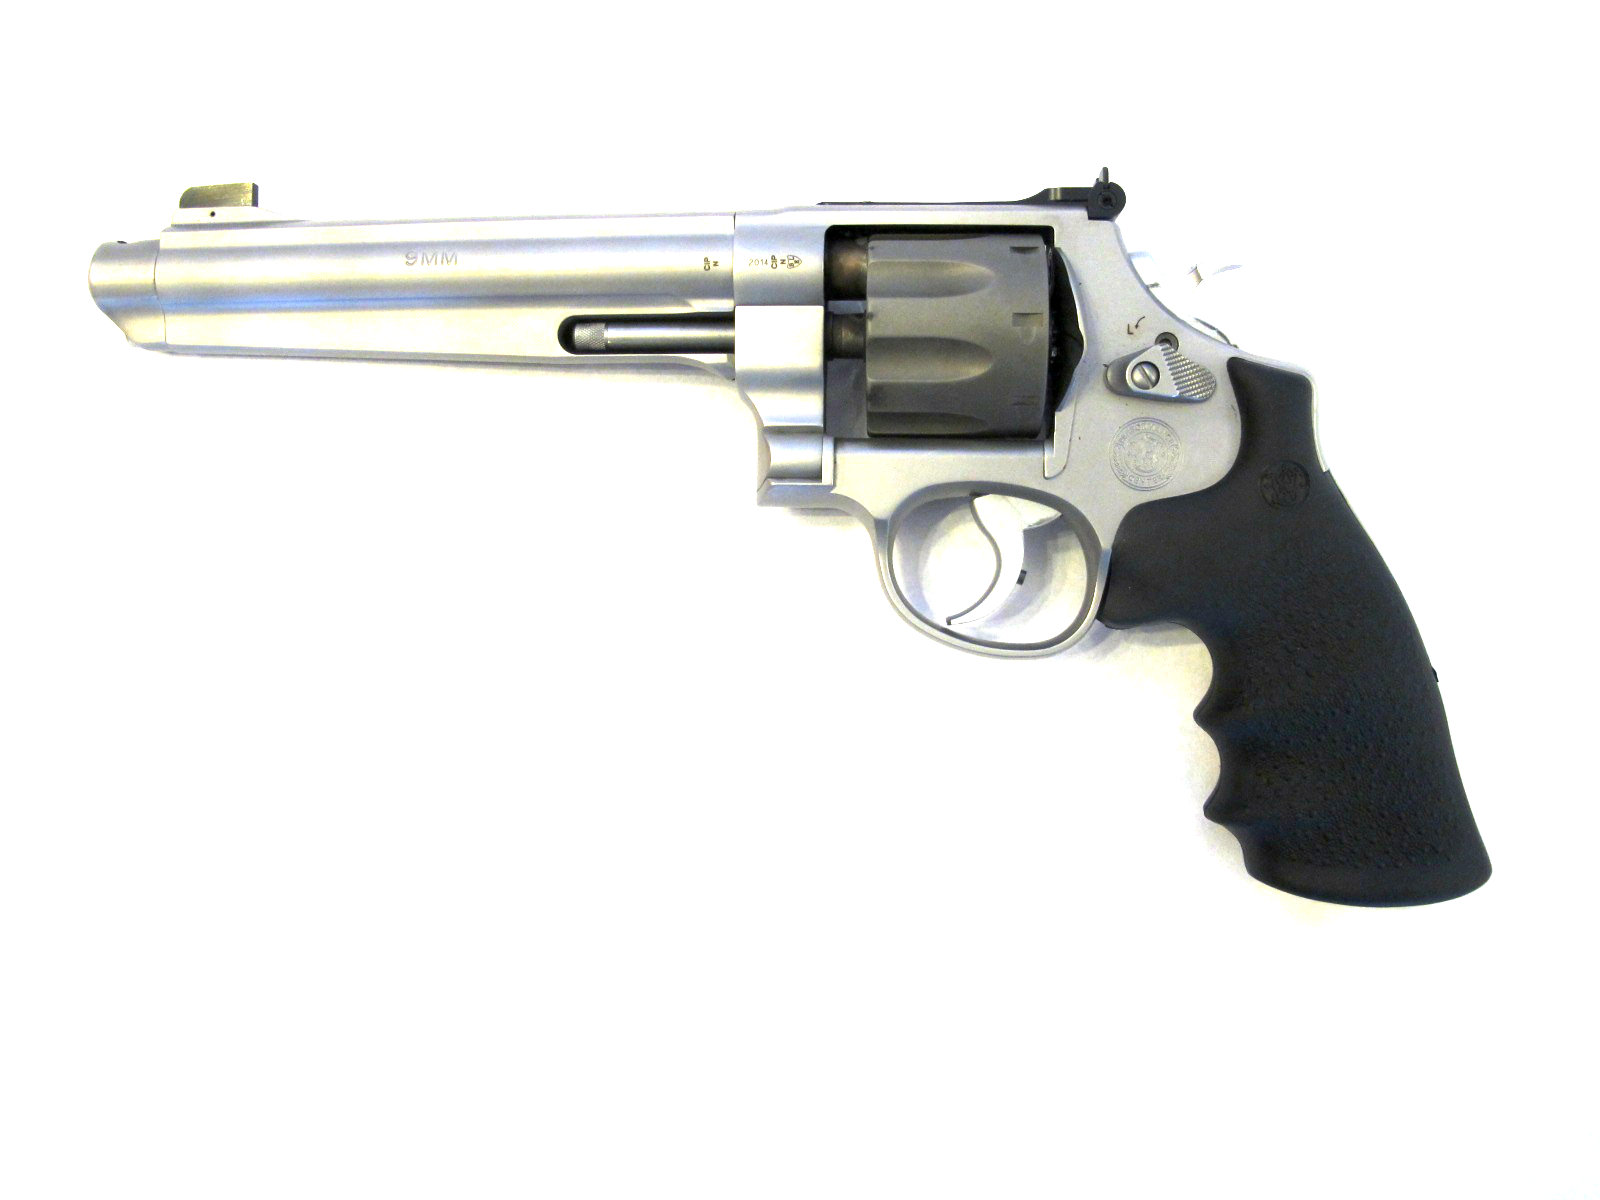 Smith & Wesson mod. 929 "Jerry Miculek"